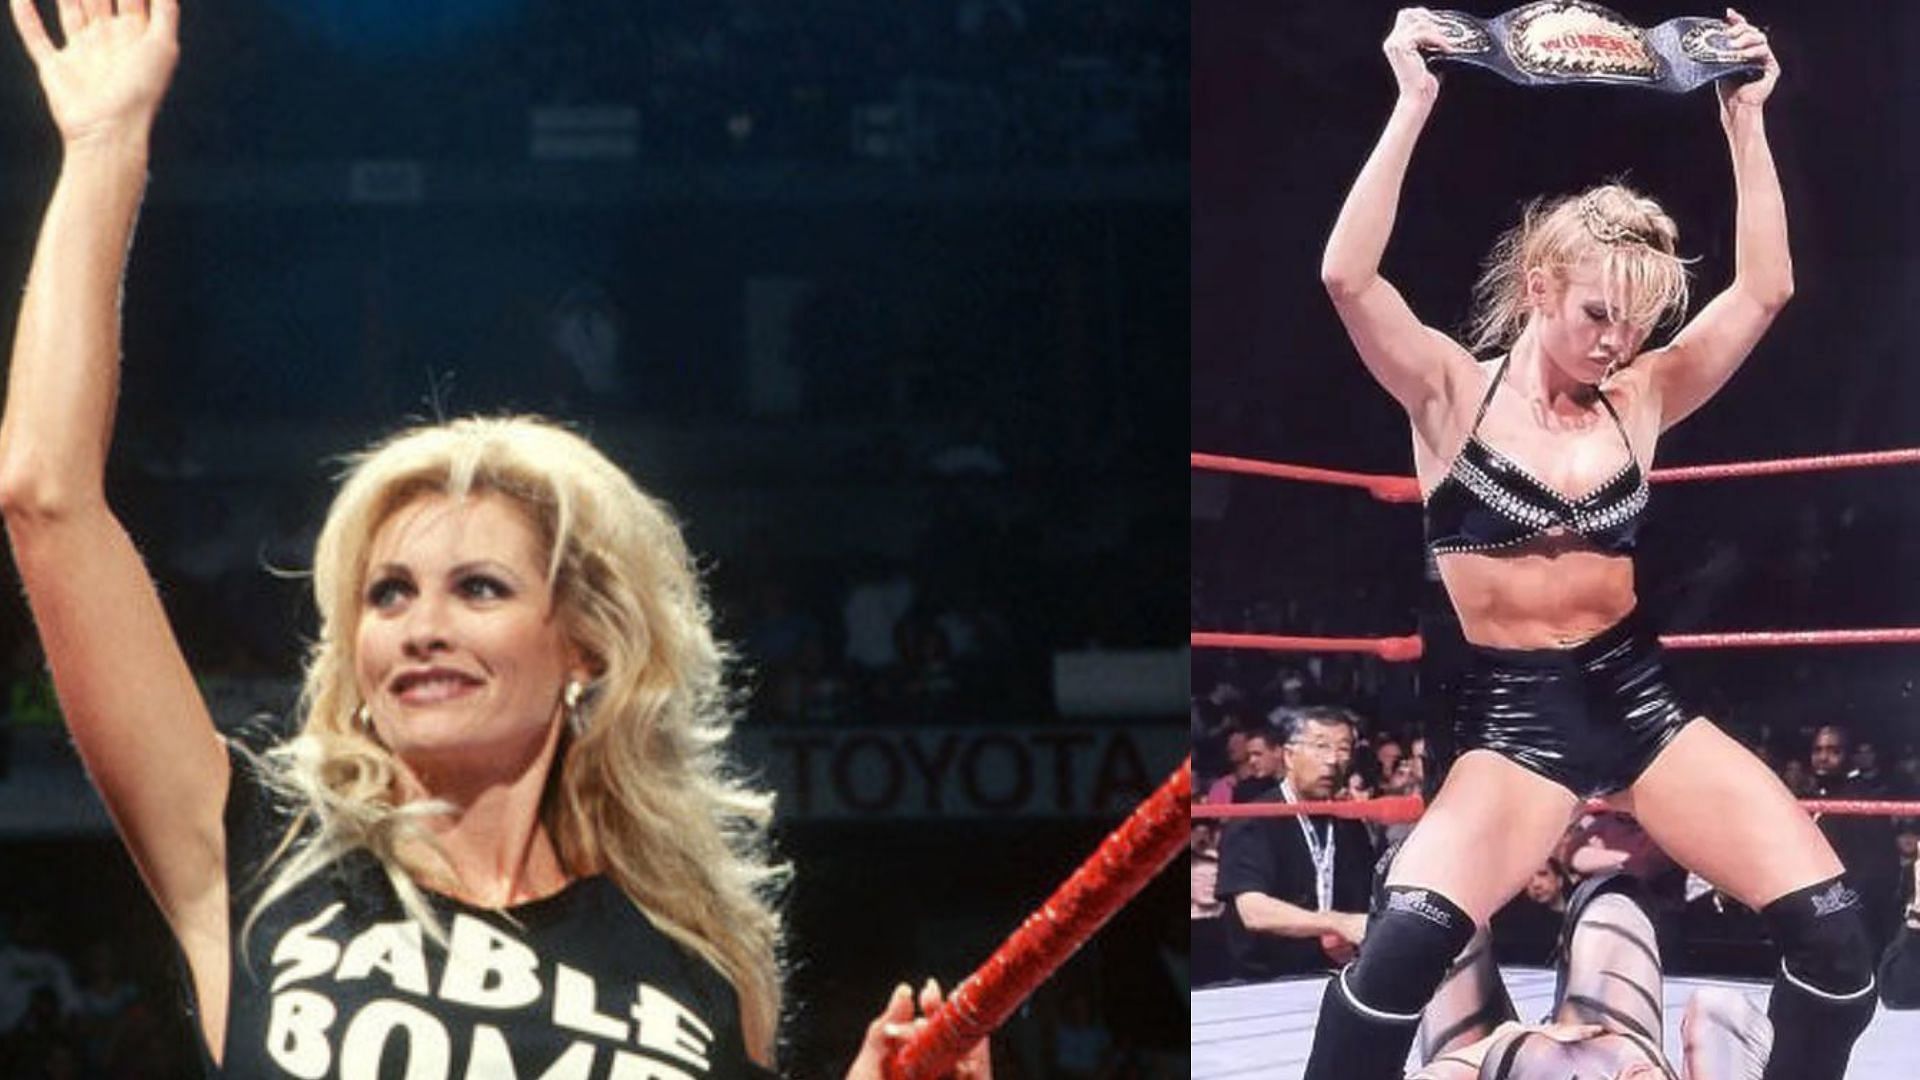 Sable was one of the most talked about WWE Superstars in the past